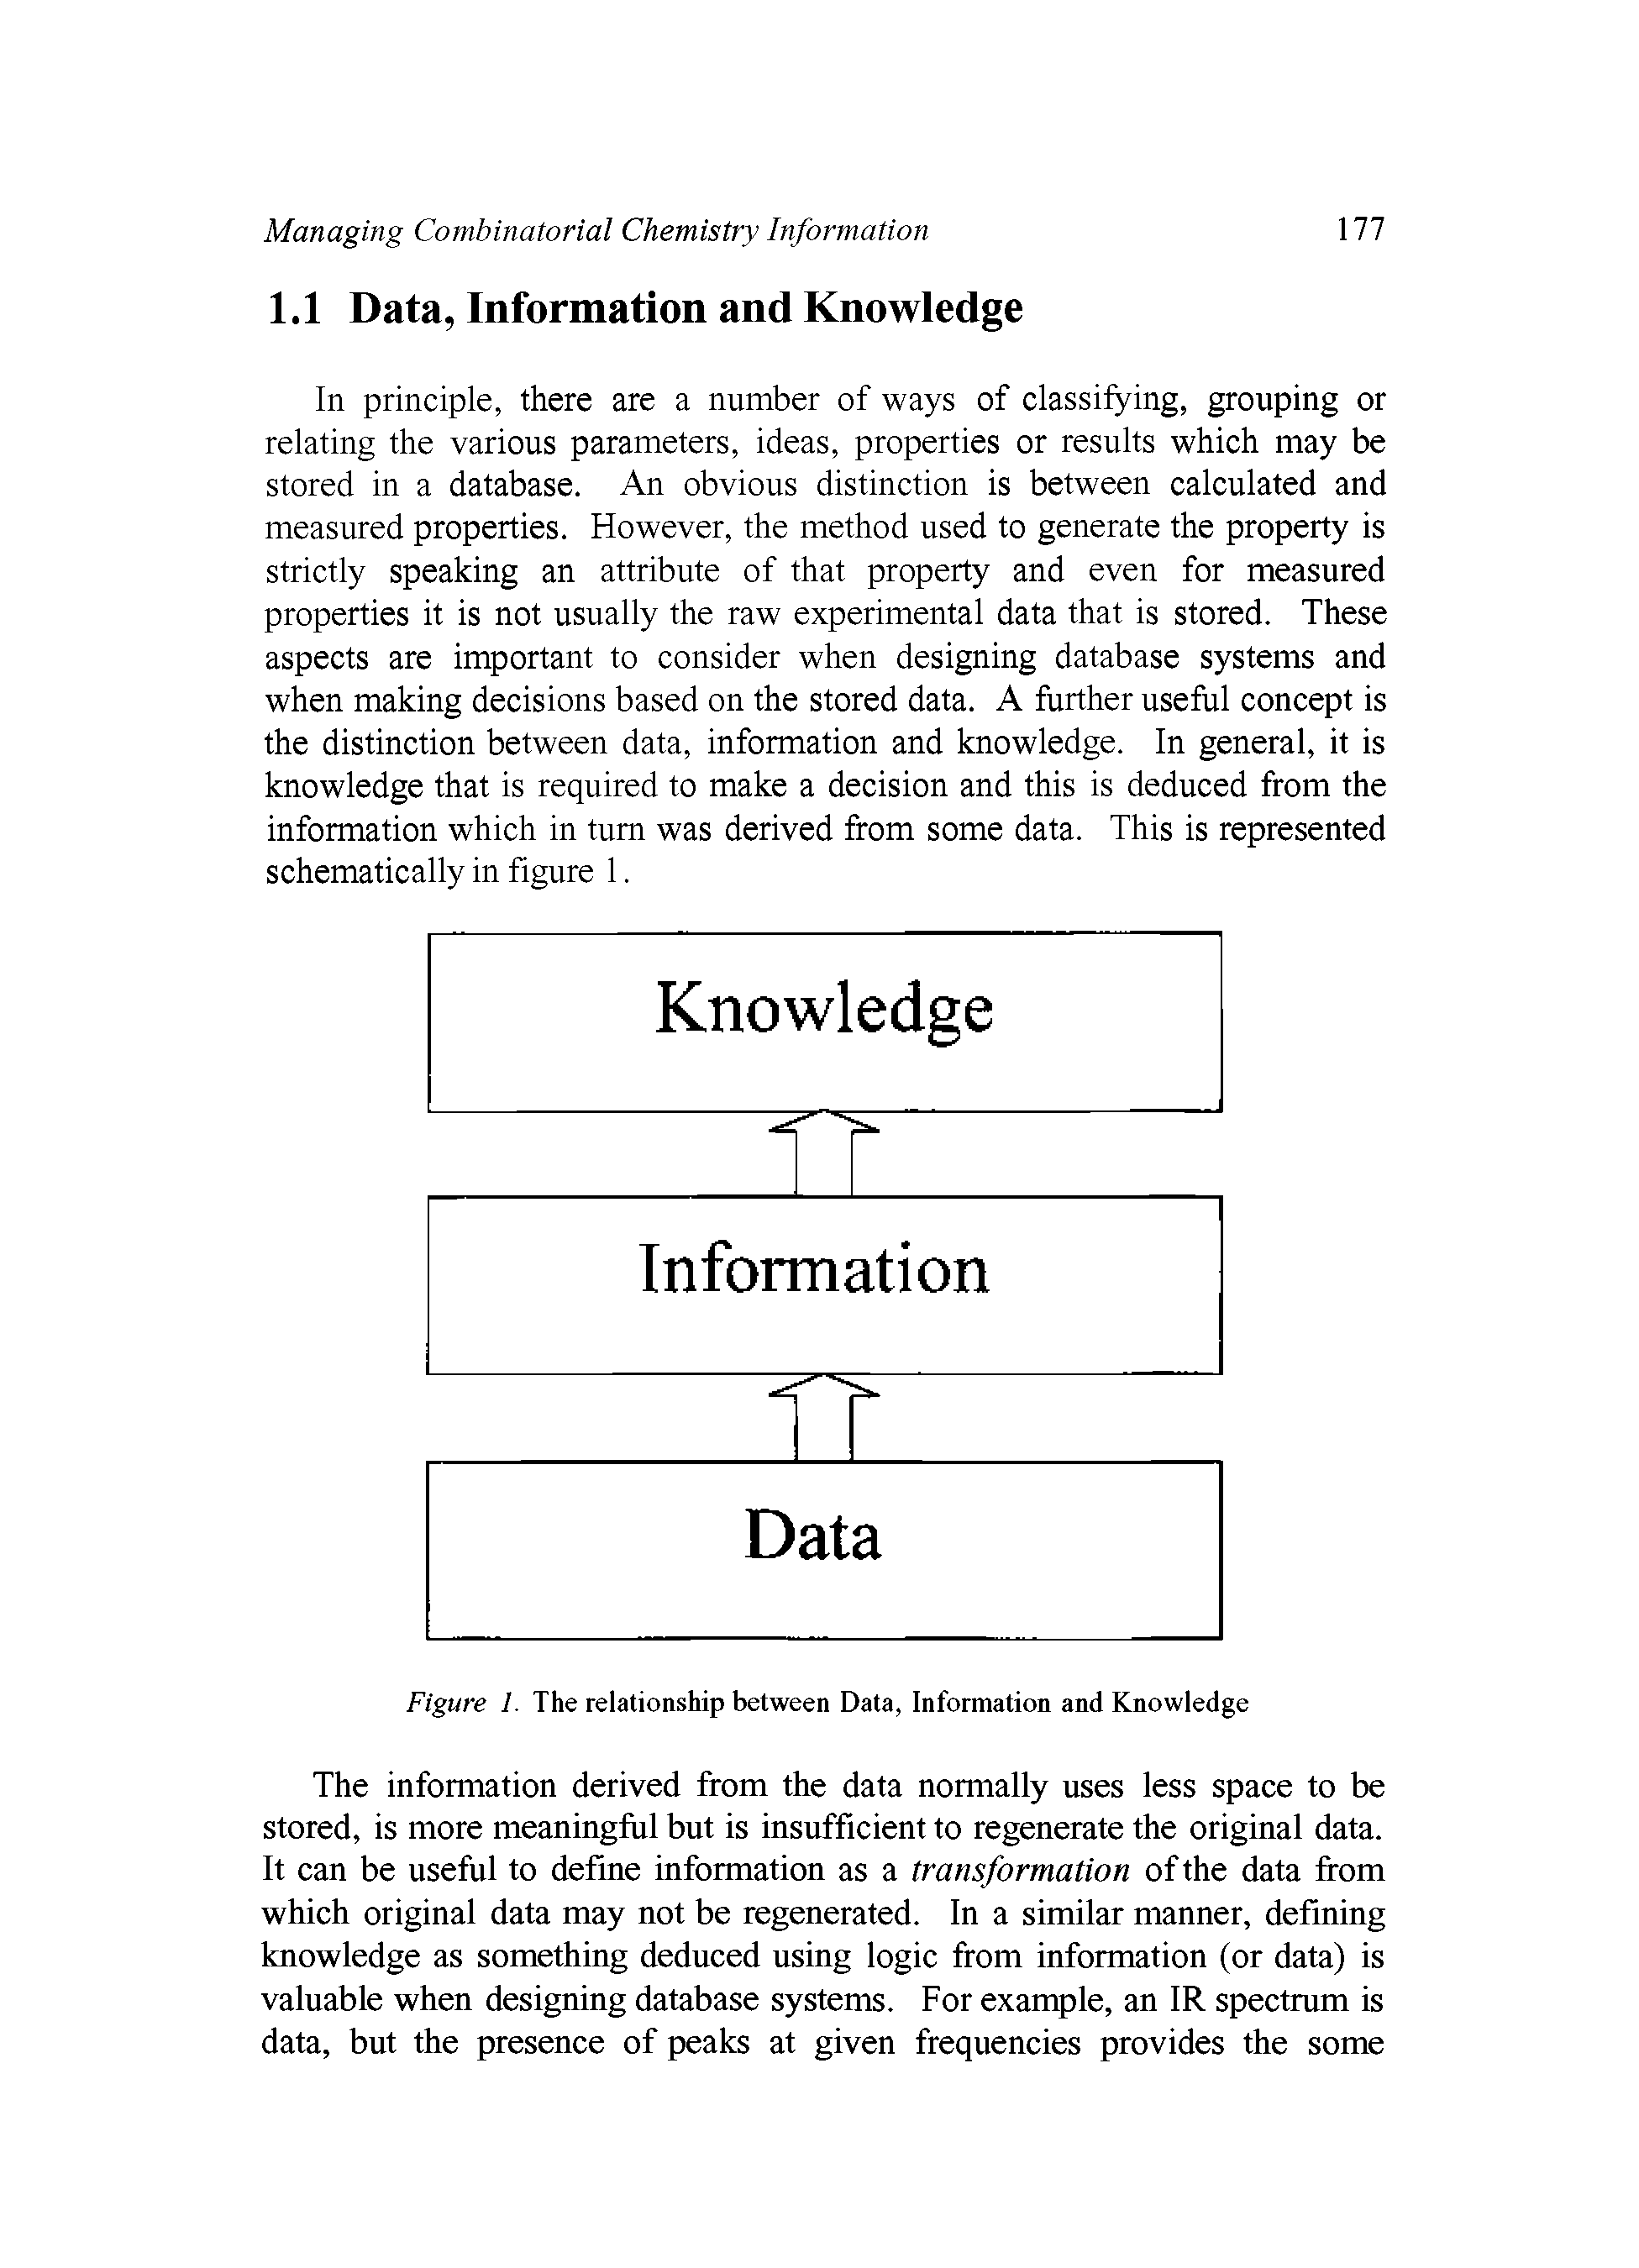 Figure 1. The relationship between Data, Information and Knowledge...